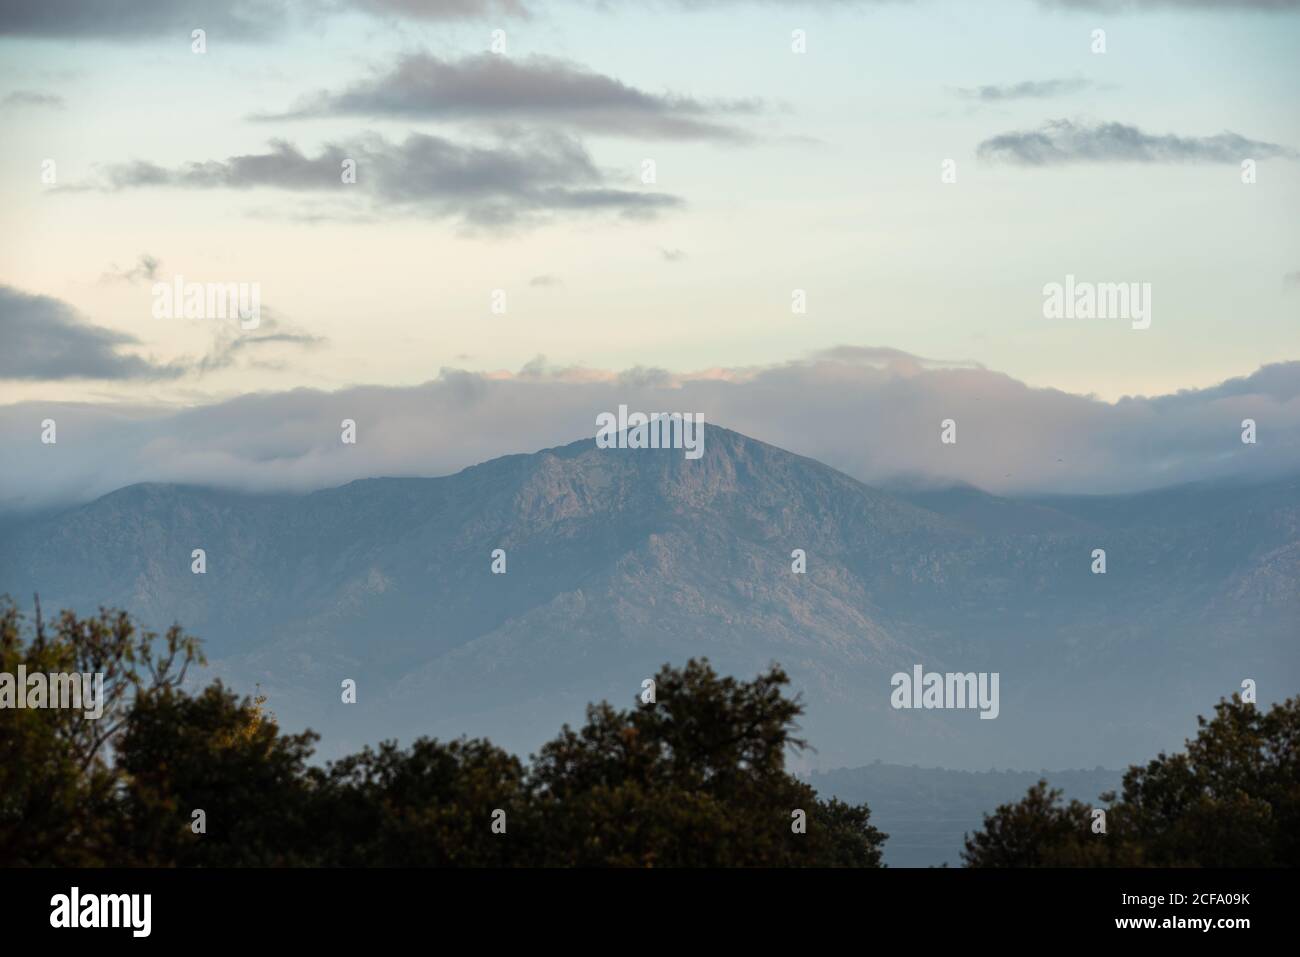 Calm landscape with mountain range covered with fog against cloudy morning sky in autumn season Stock Photo